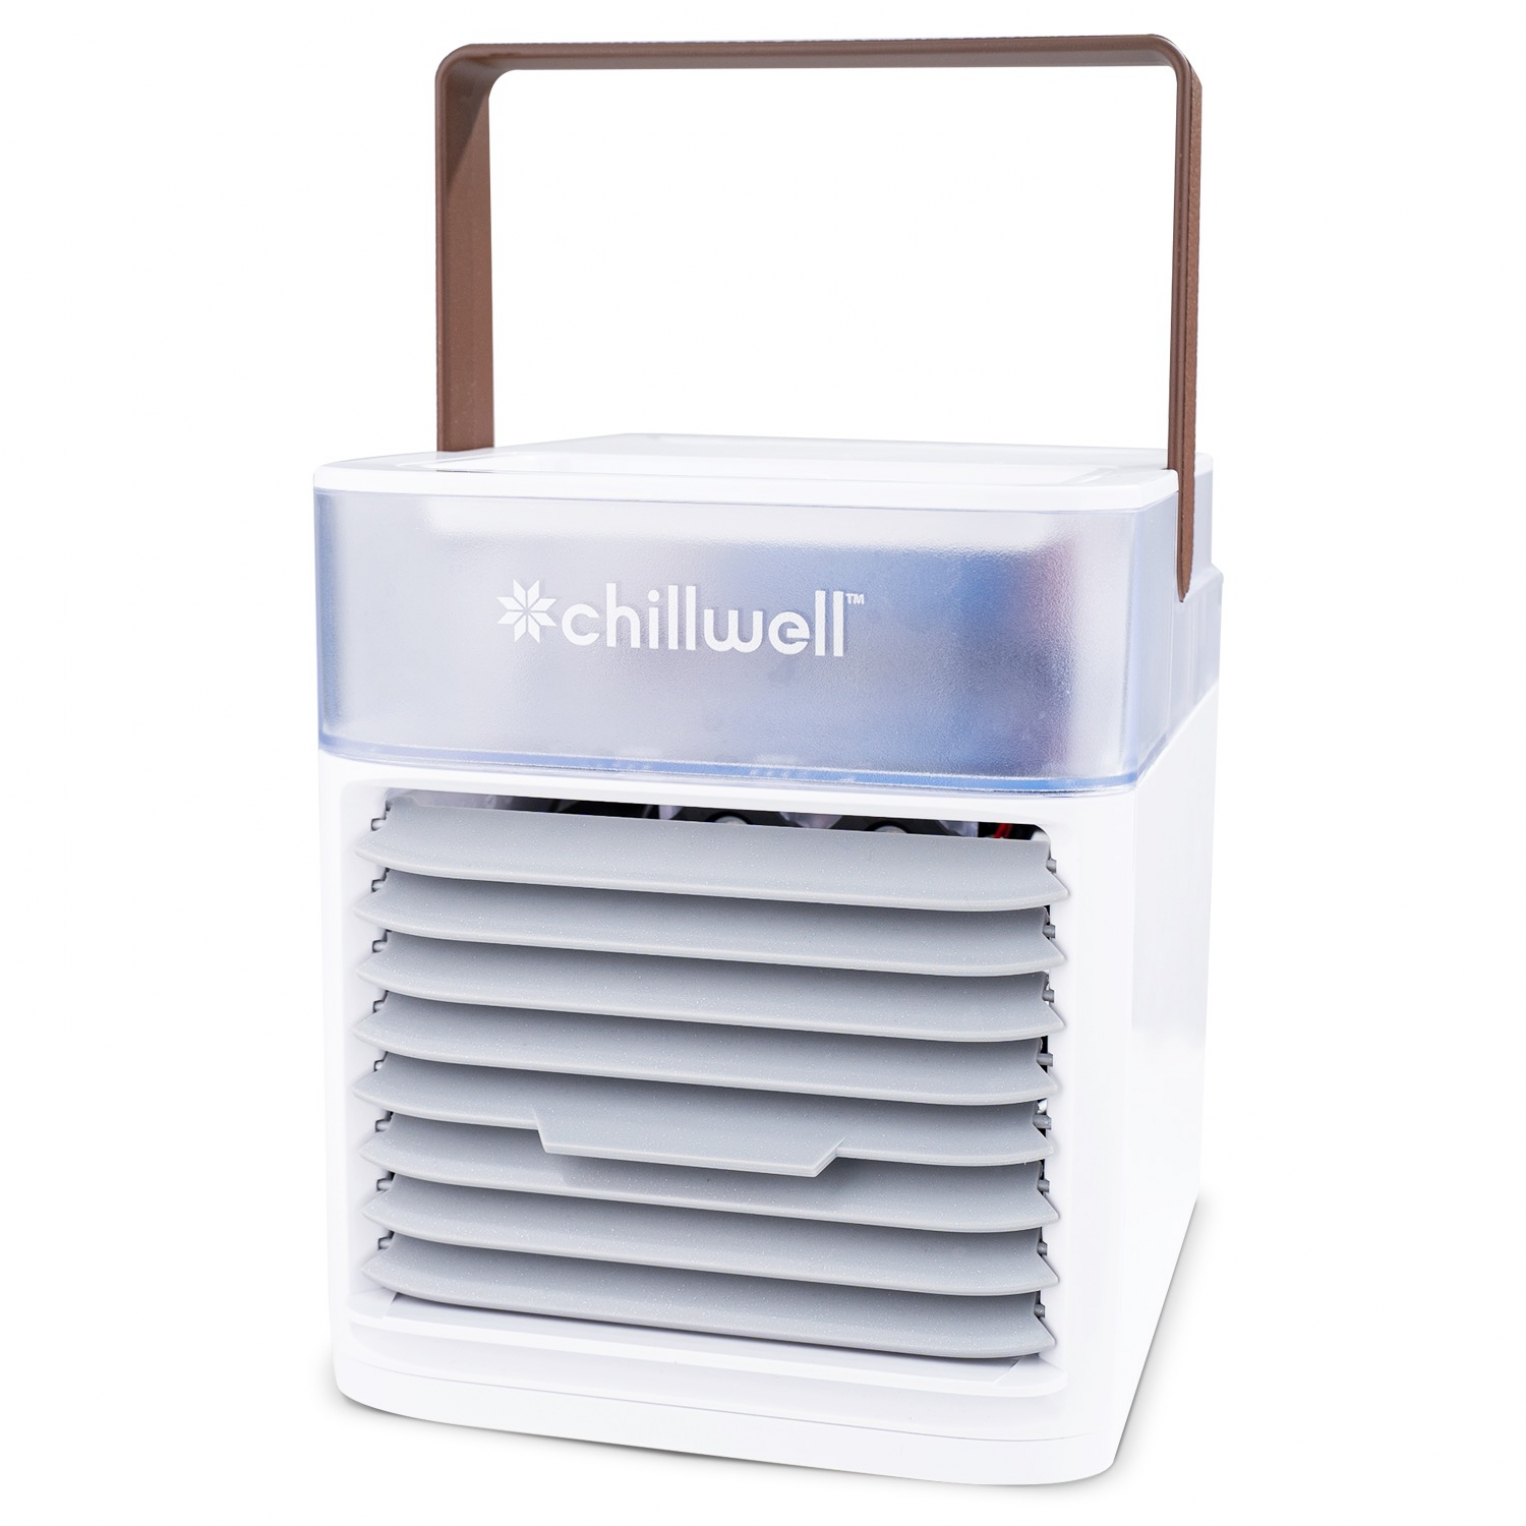 Chillwell Ac Personal Space Cooler Amazon